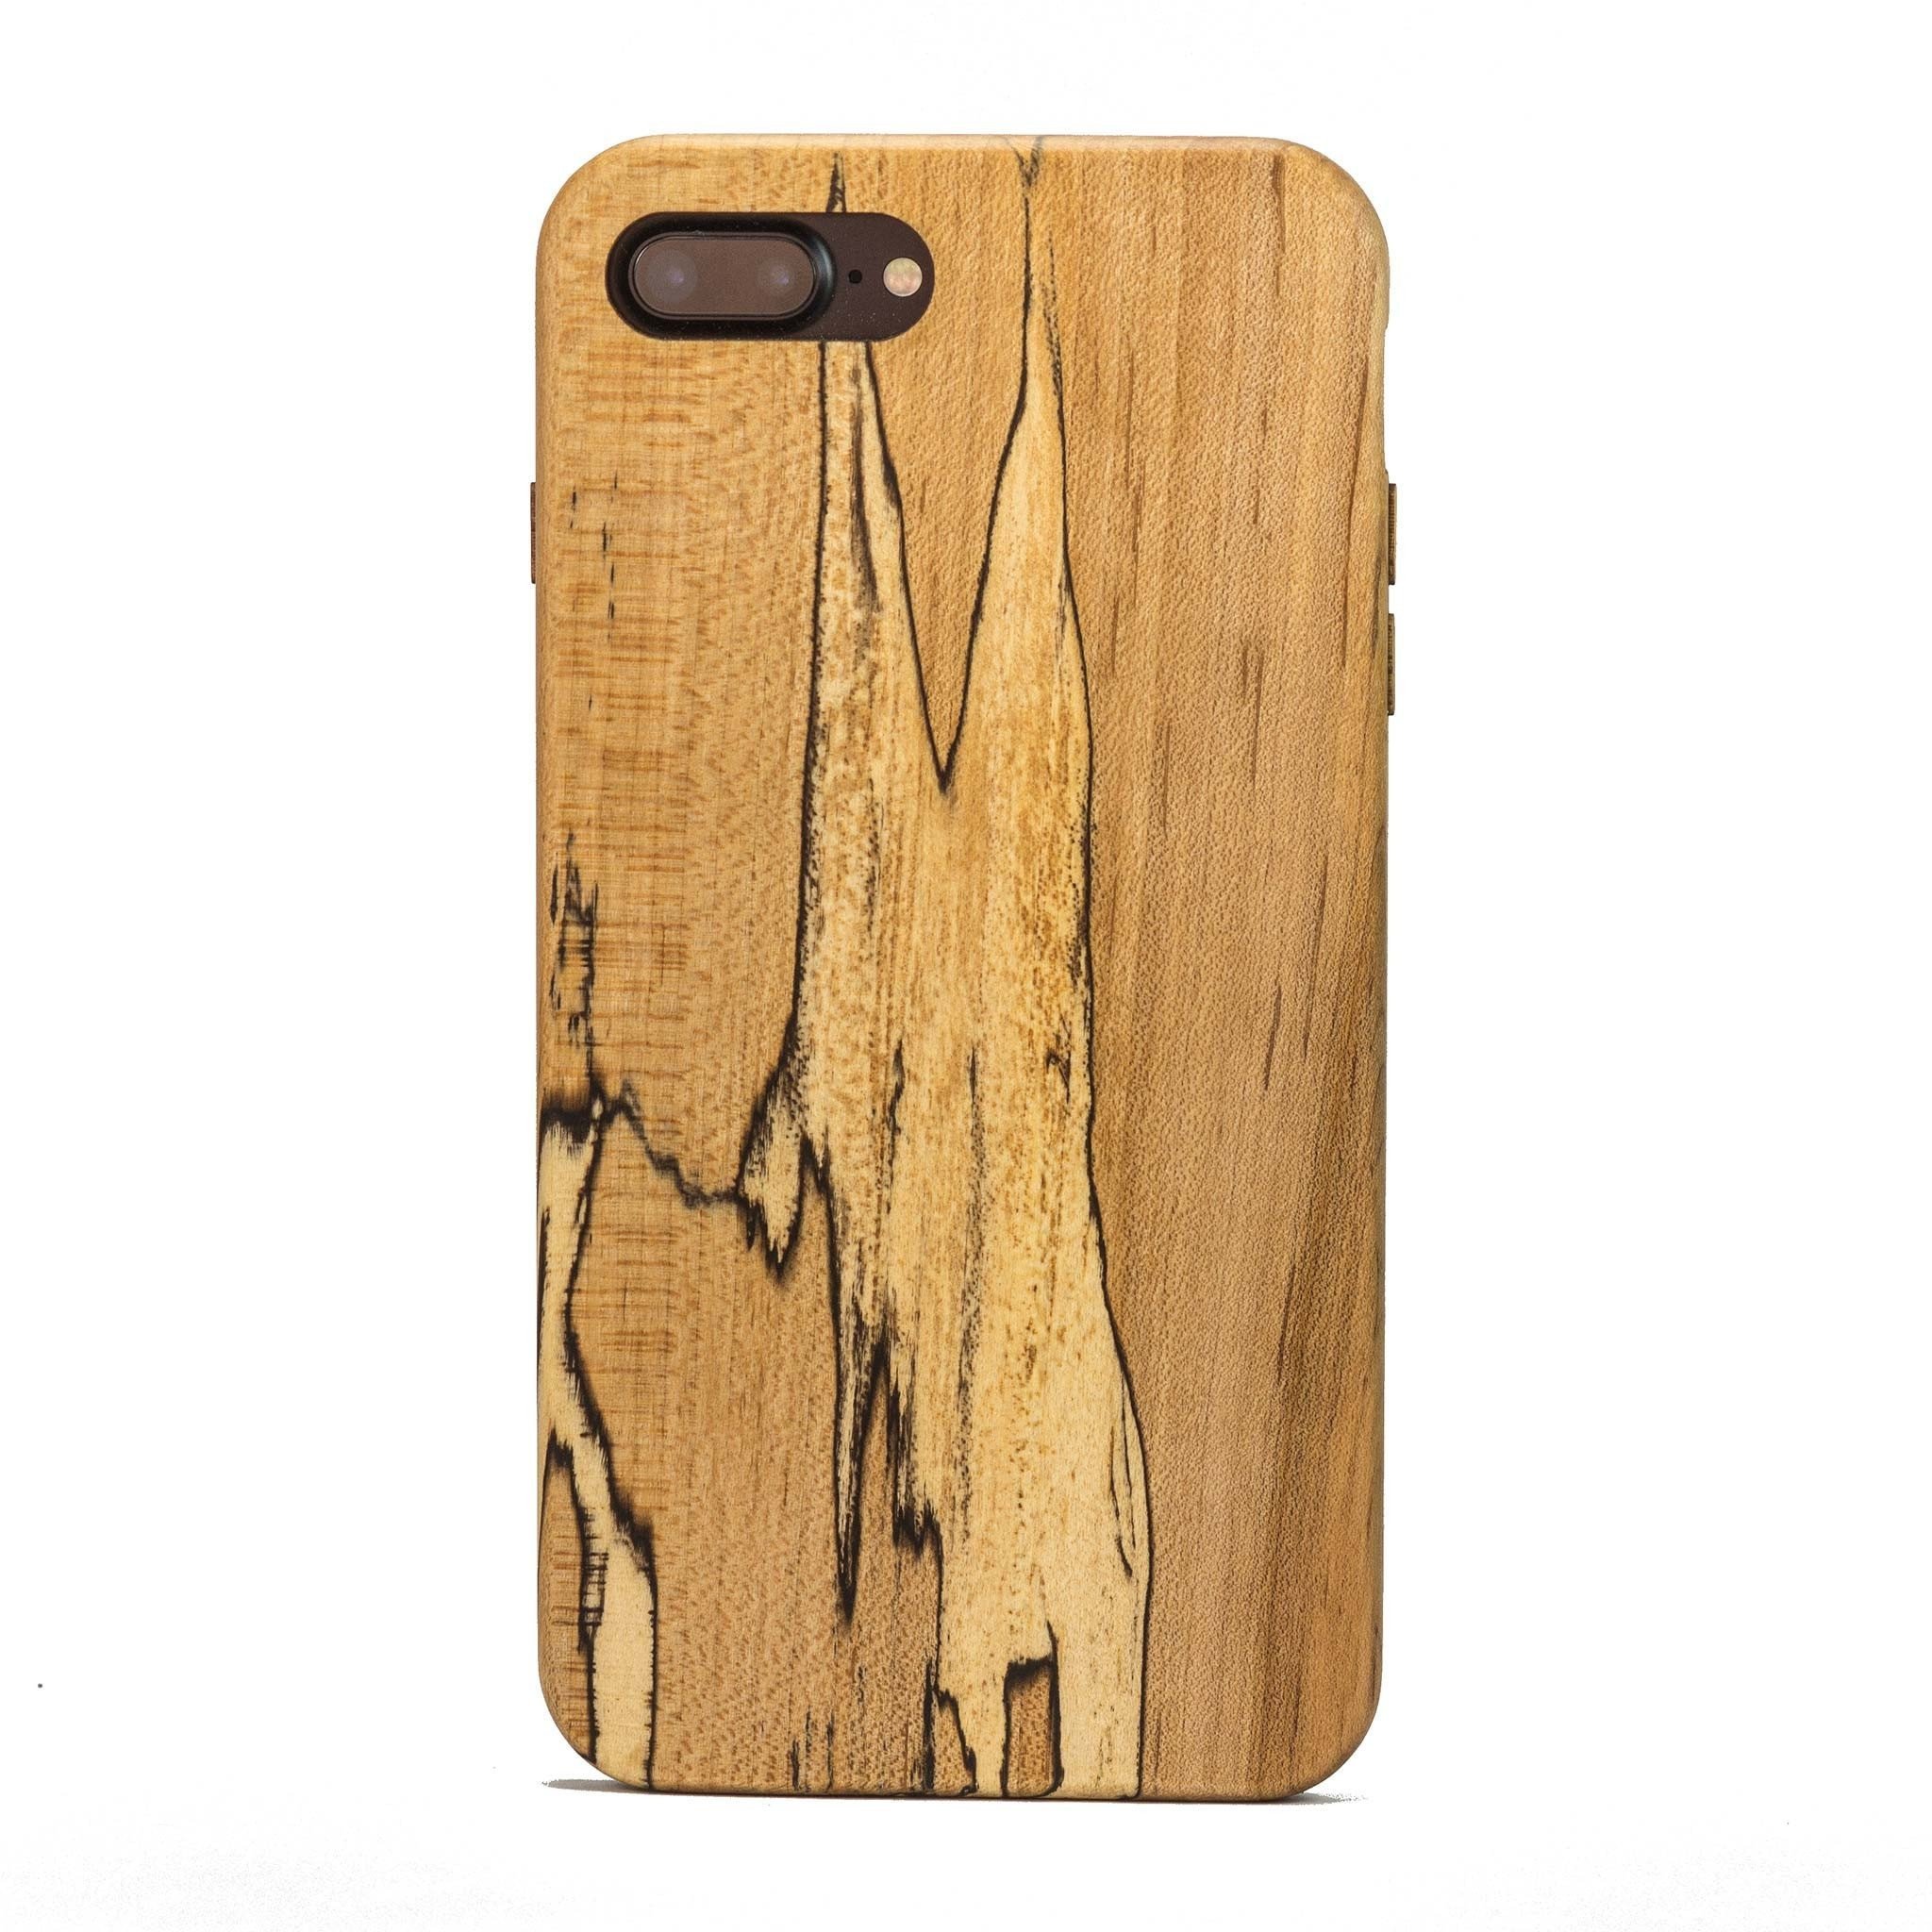 Wood Phone Cases | Buy Kerf Case Wooden iPhone Cases - iPhone 8 Plus